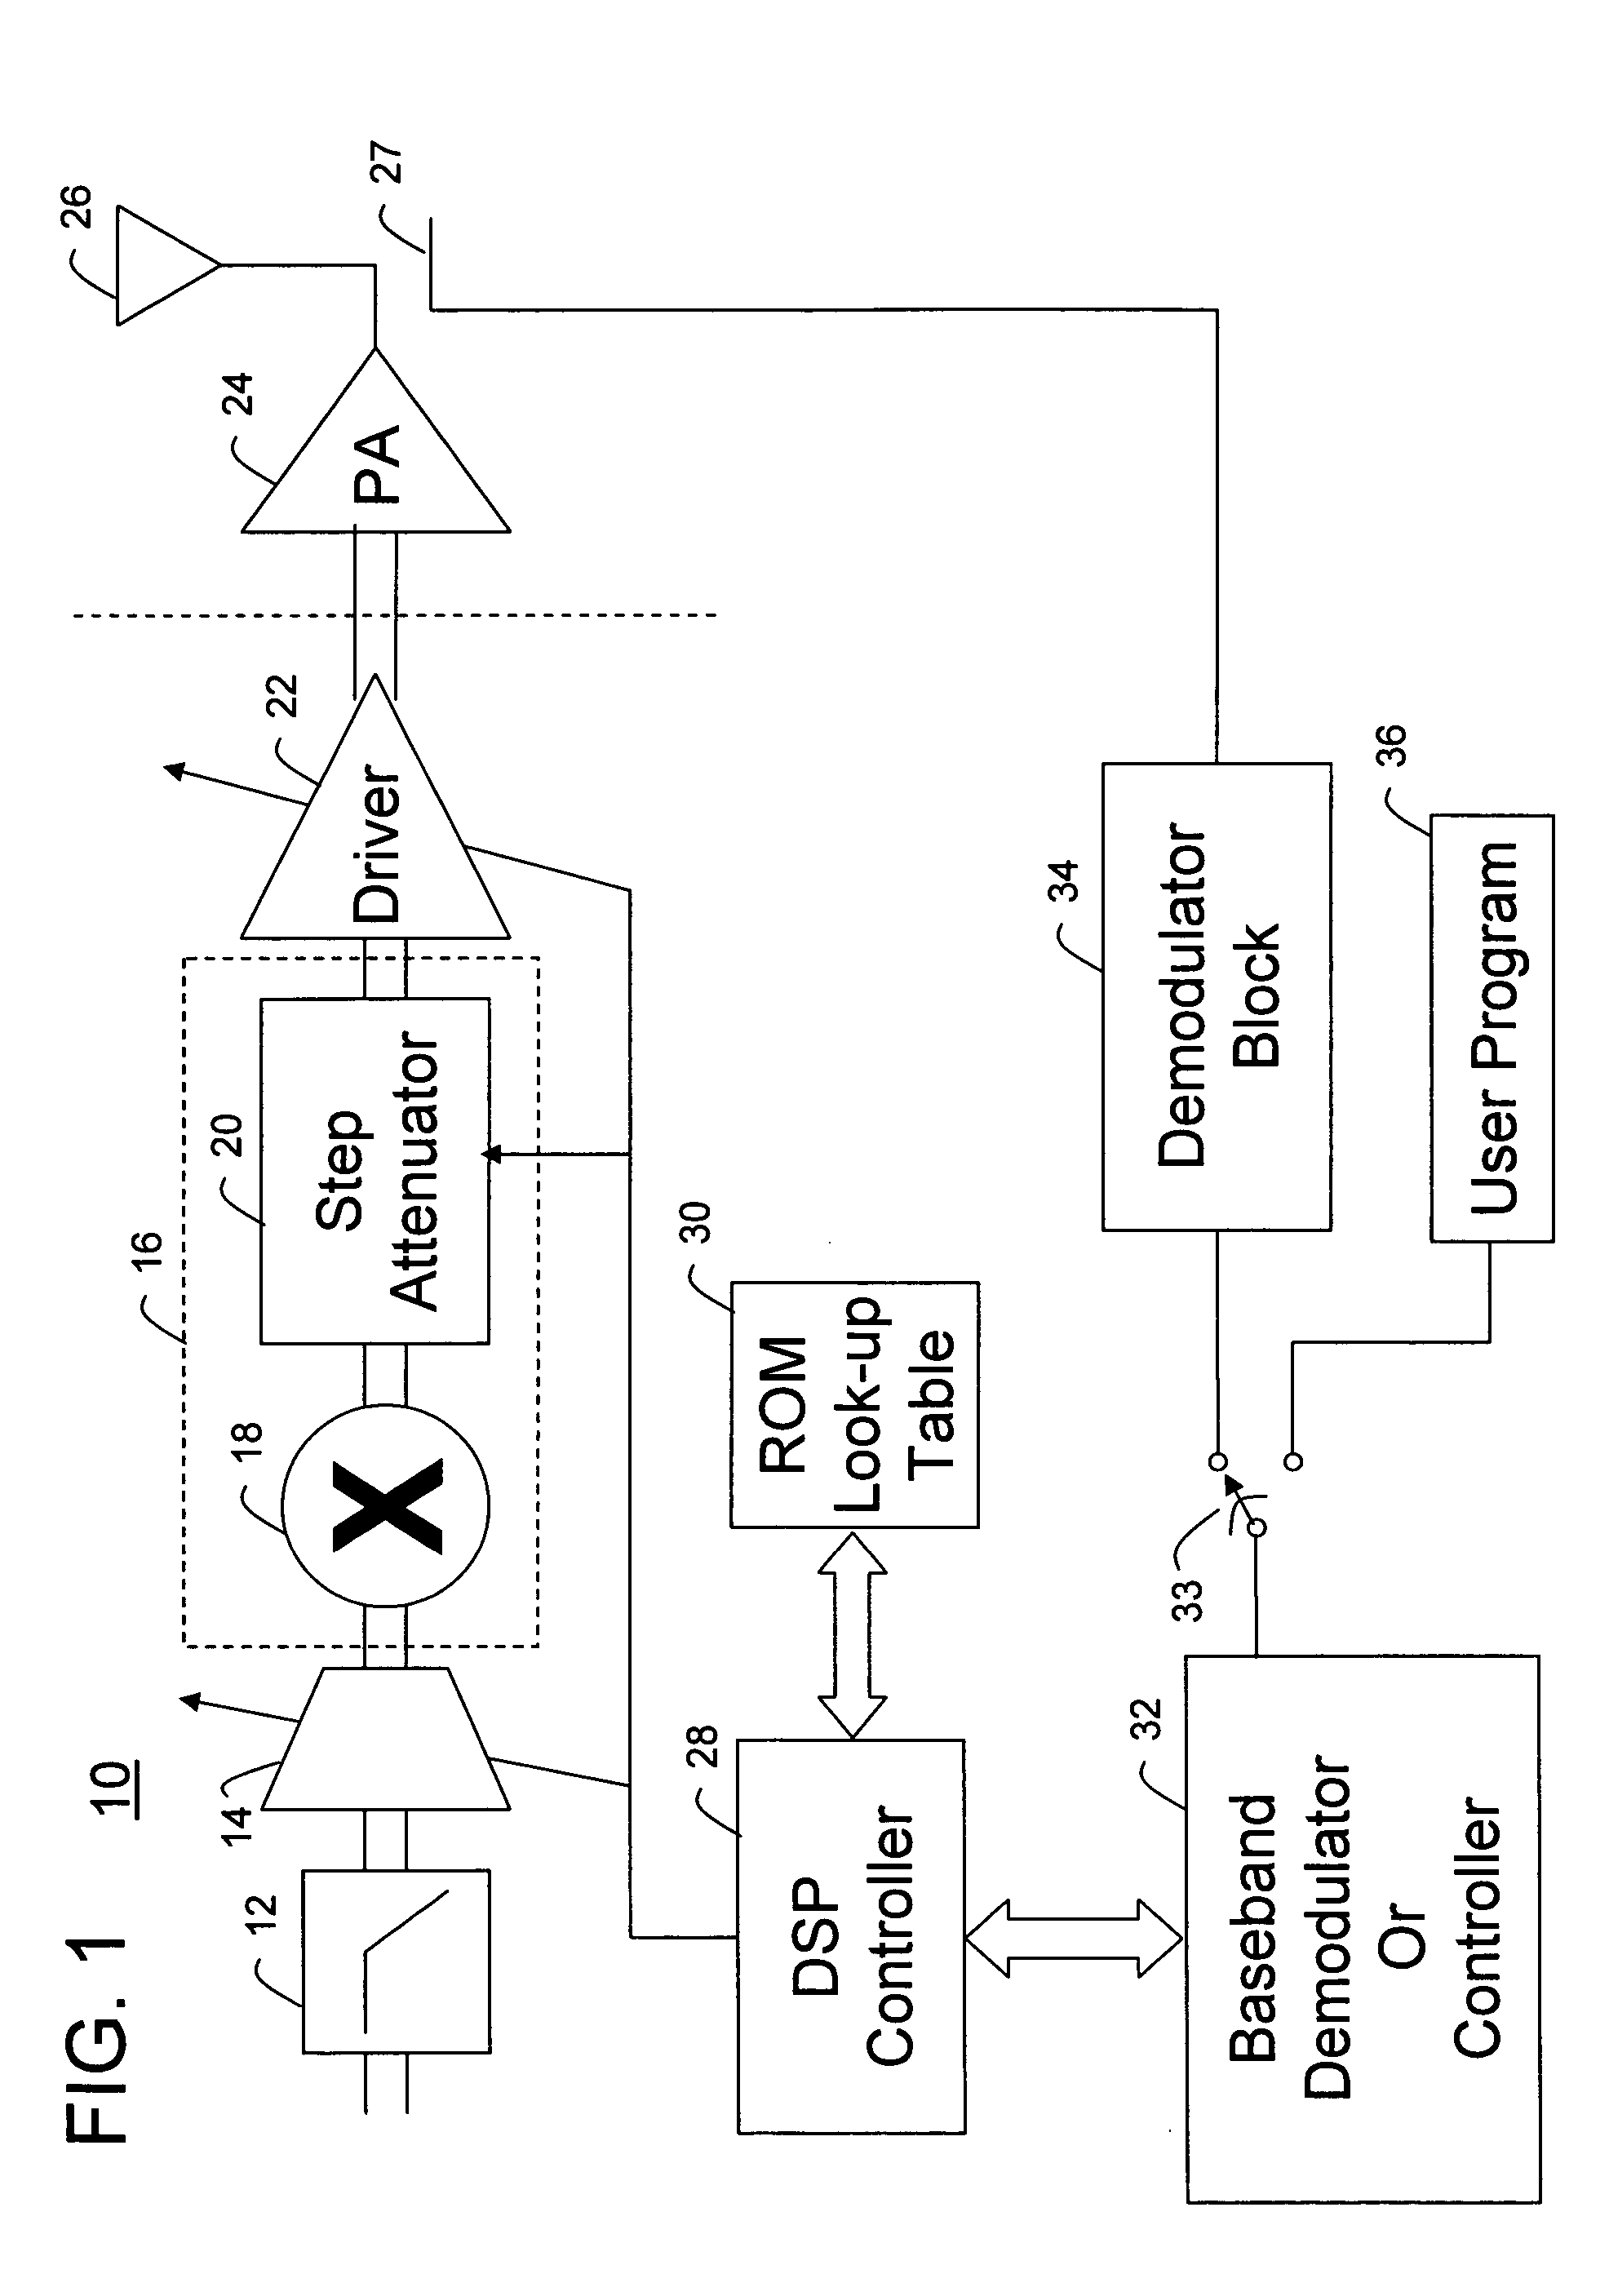 Method and system for dynamic range power control